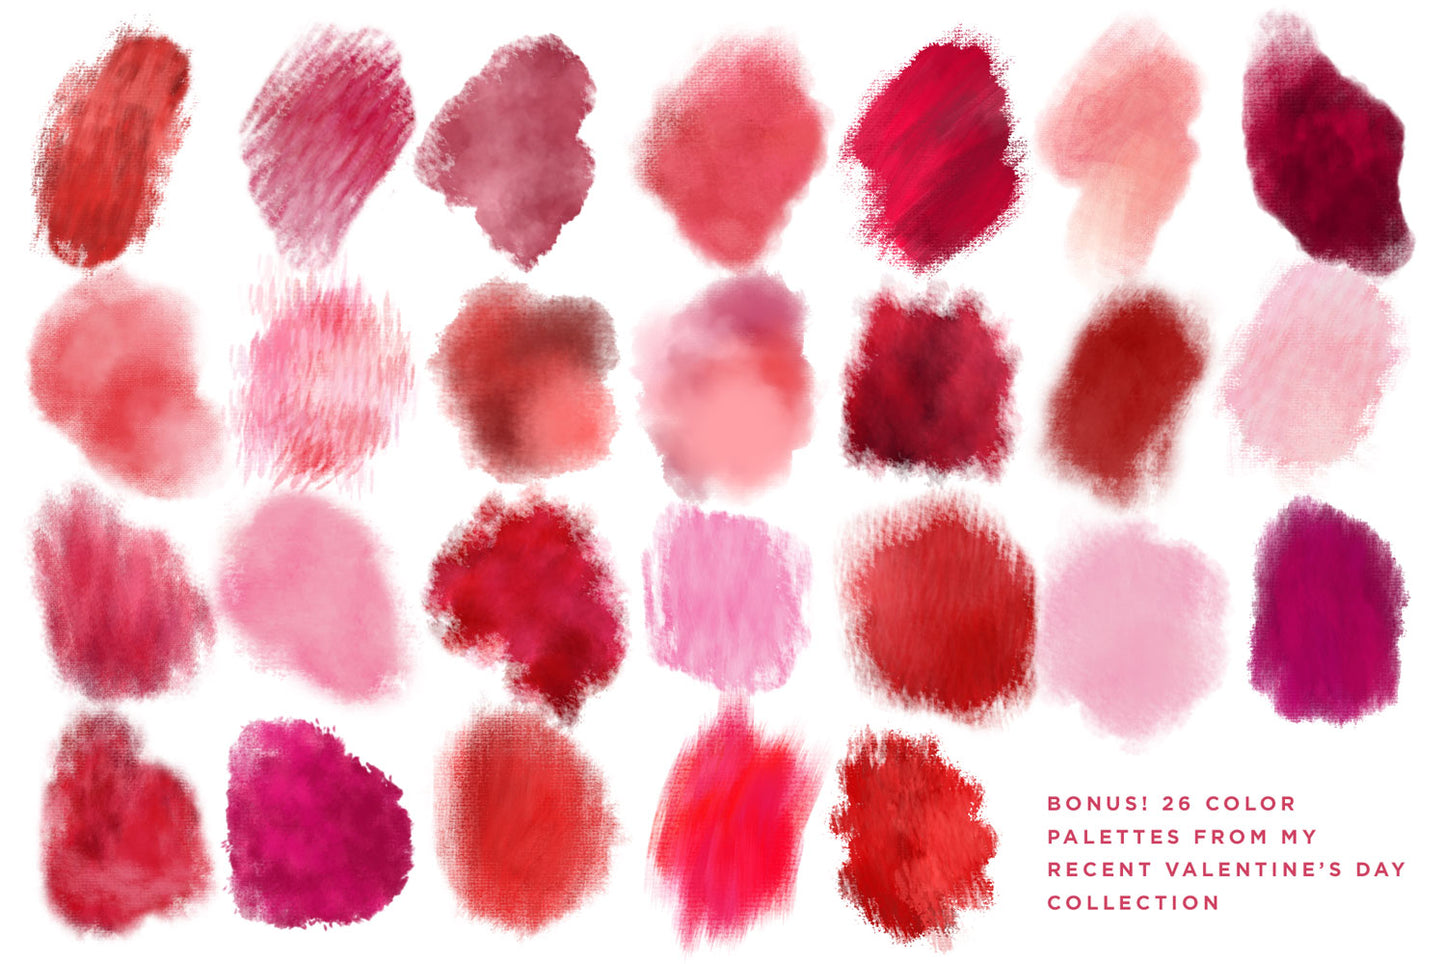 Tulle and organza couture multi-color Photoshop brushes, bonus red and pink color palettes